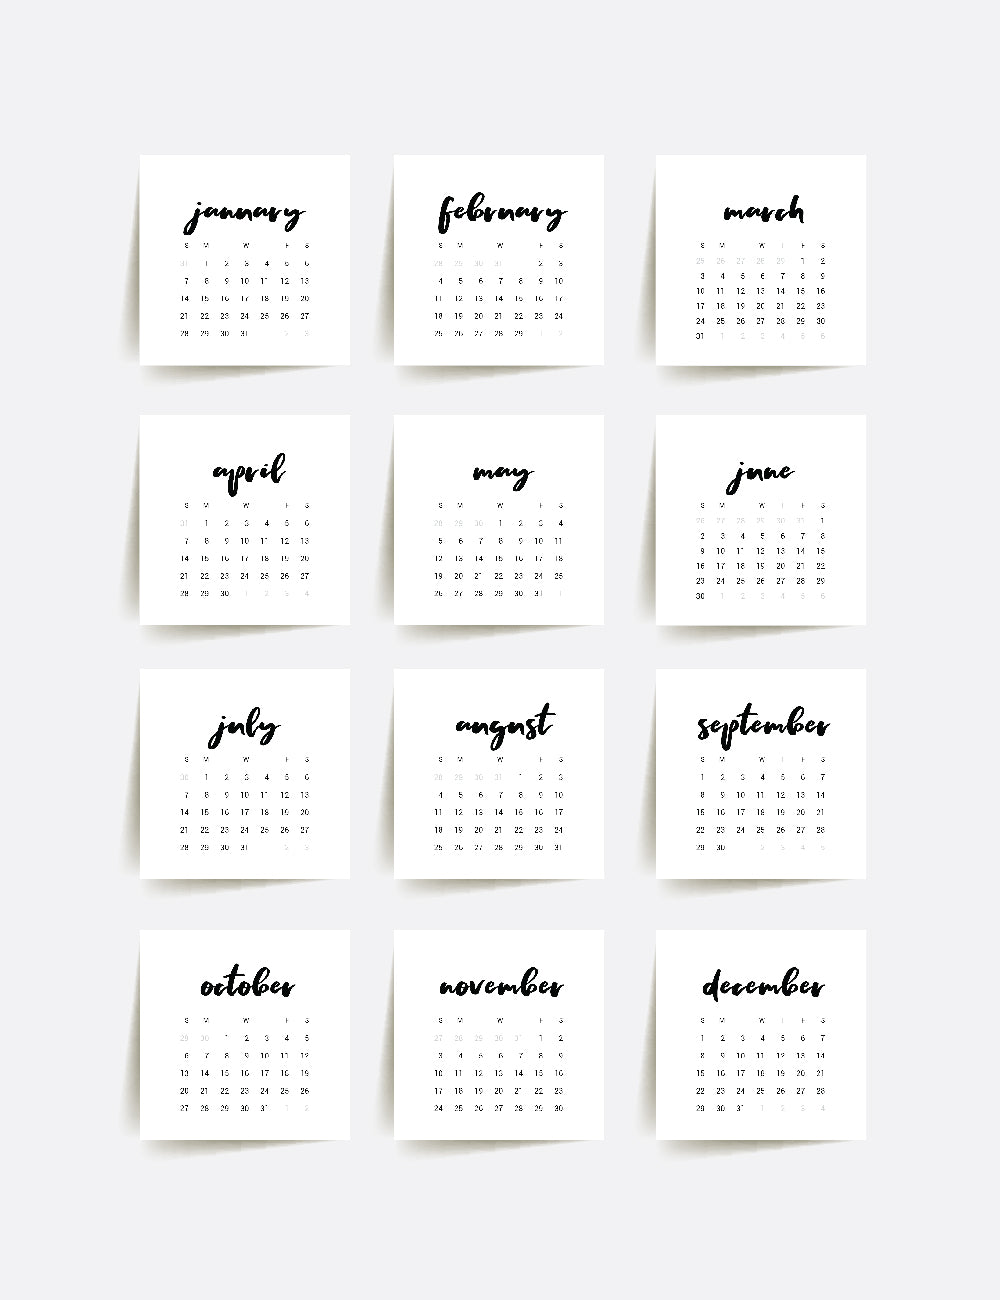 2024 mini calendar stickers for bullet journal and planner